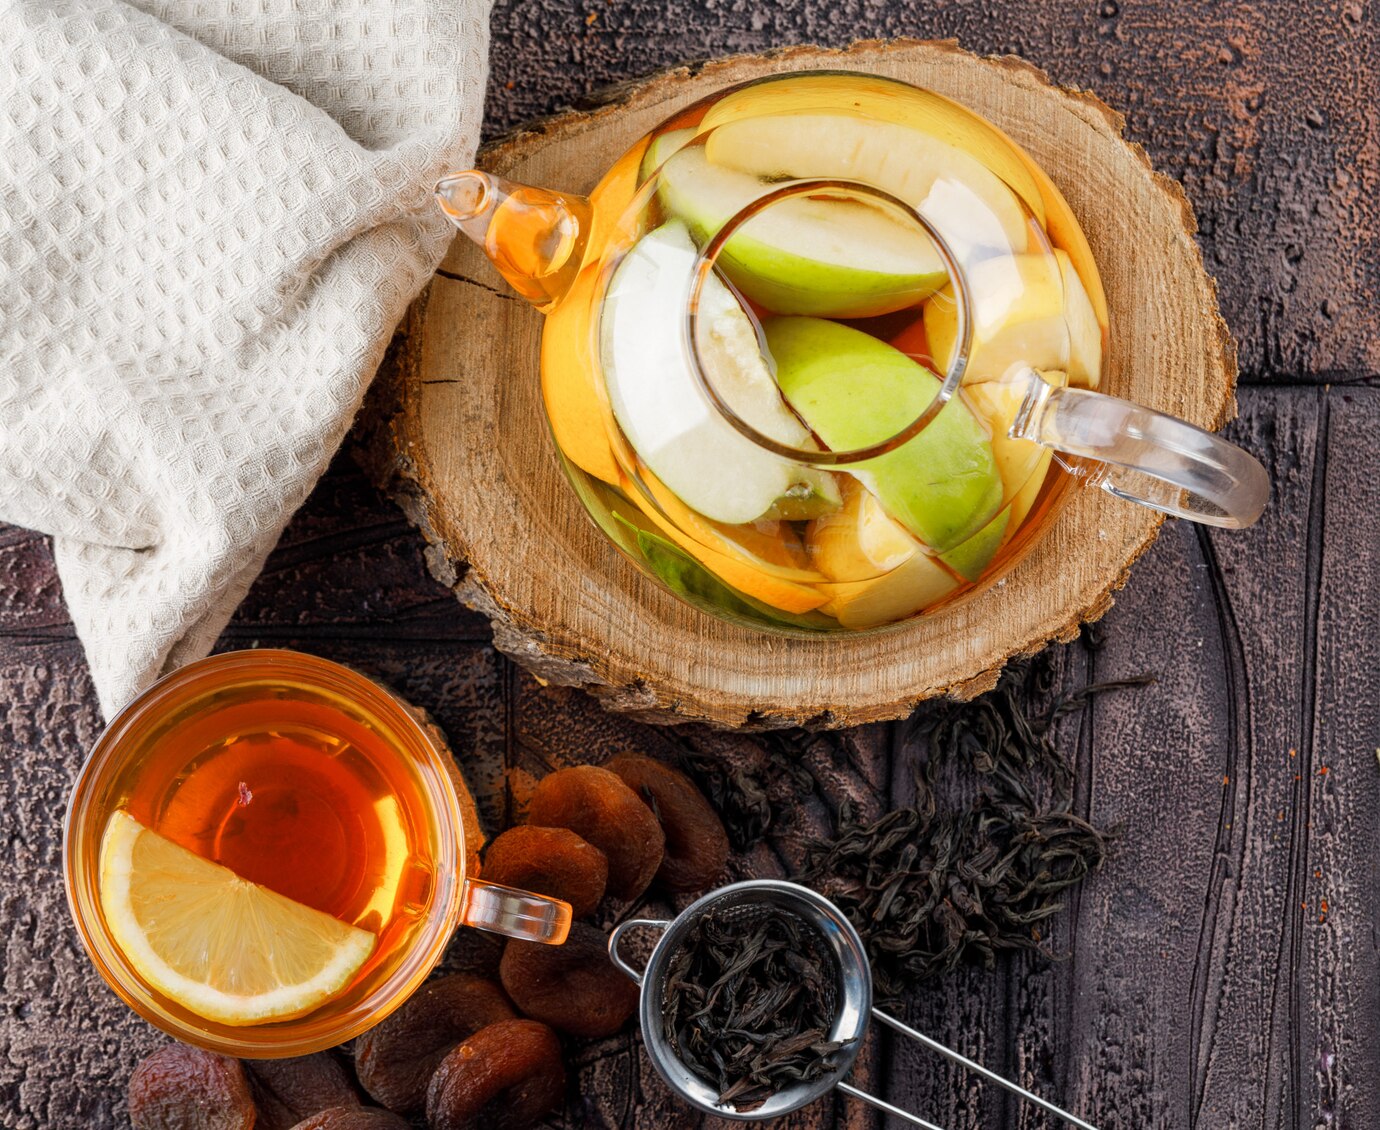 fruit-infused-water-teapot-with-tea-dried-apricots-wood-kitchen-towel-container-flat-lay-stone-tile-surface_176474-6361.jpg